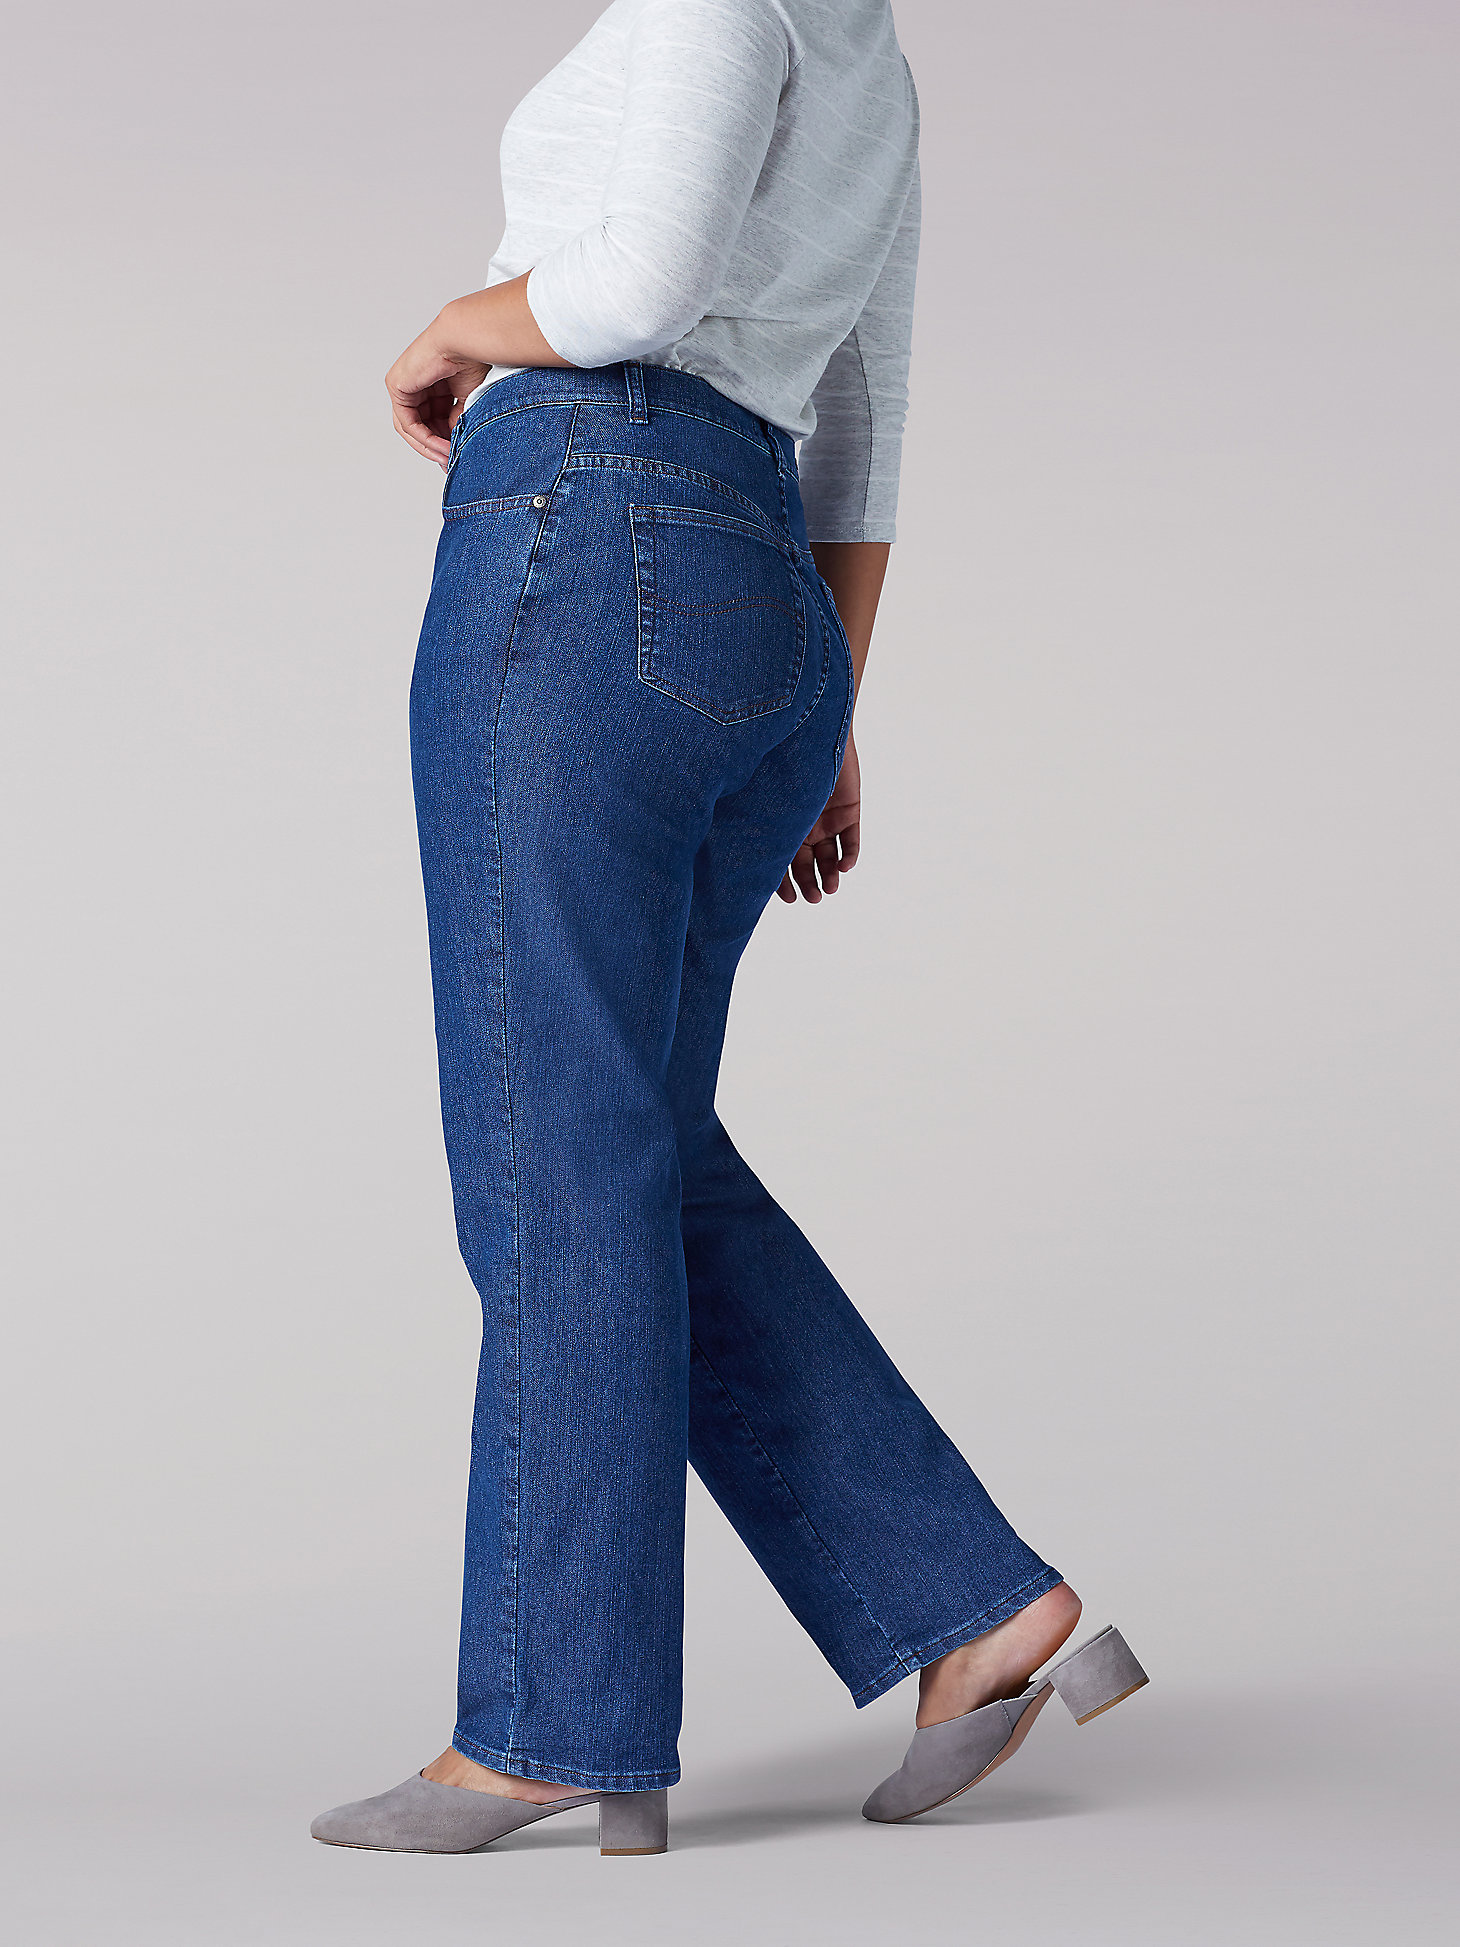 Women’s Original Relaxed Fit Straight Leg Jeans (Plus) in Premium Rinse alternative view 2